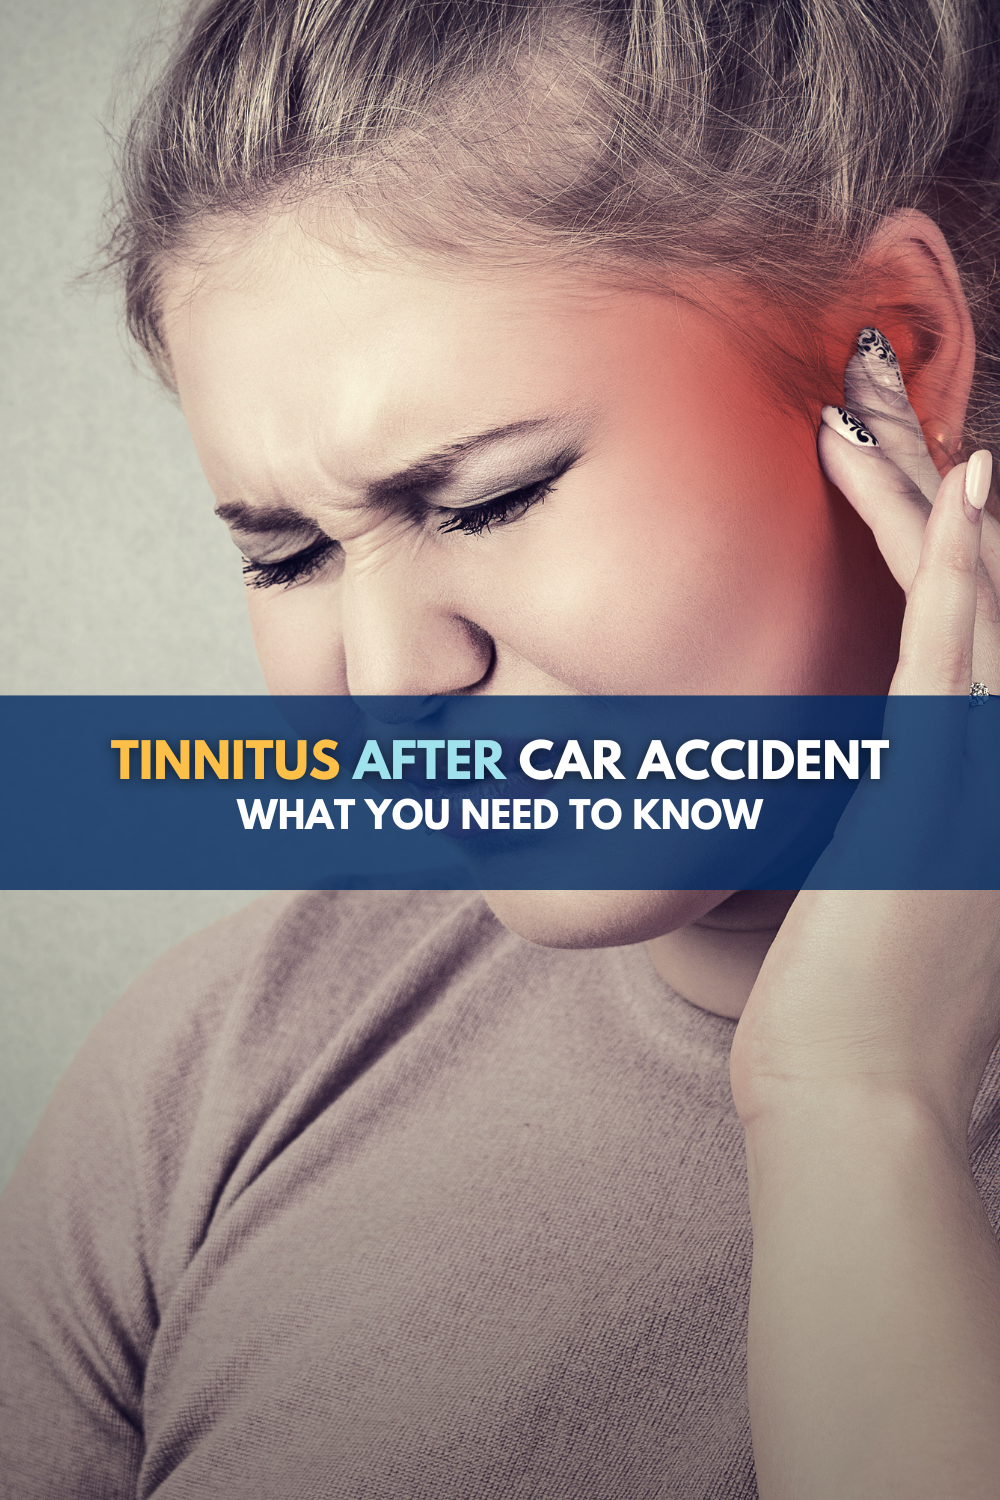 Tinnitus After Car Accident: What You Need To Know